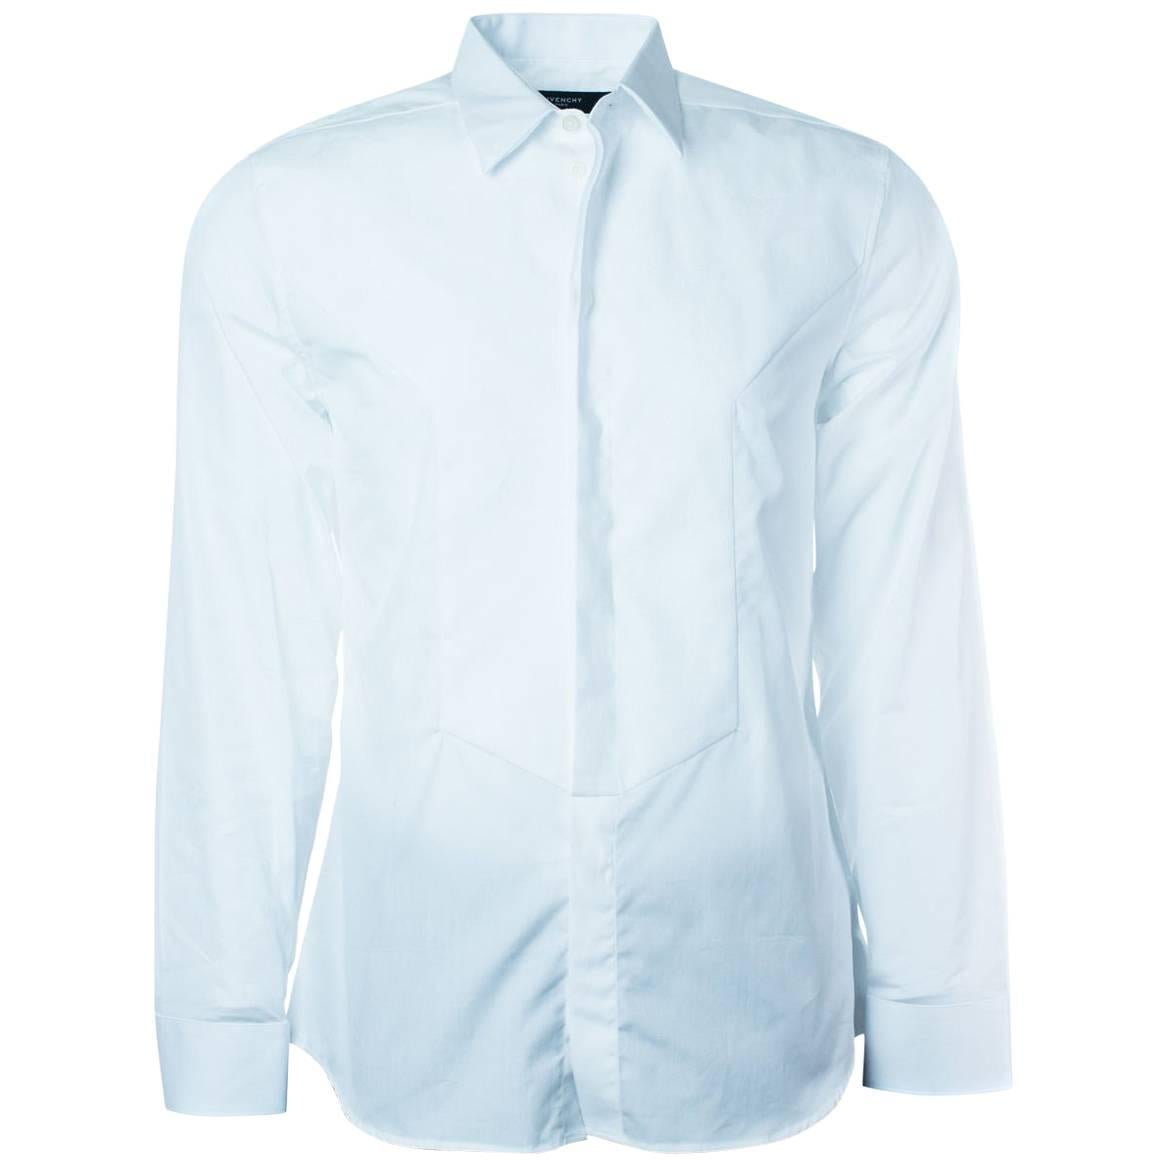 Givenchy Men's 100% Cotton Solid White Button Down For Sale